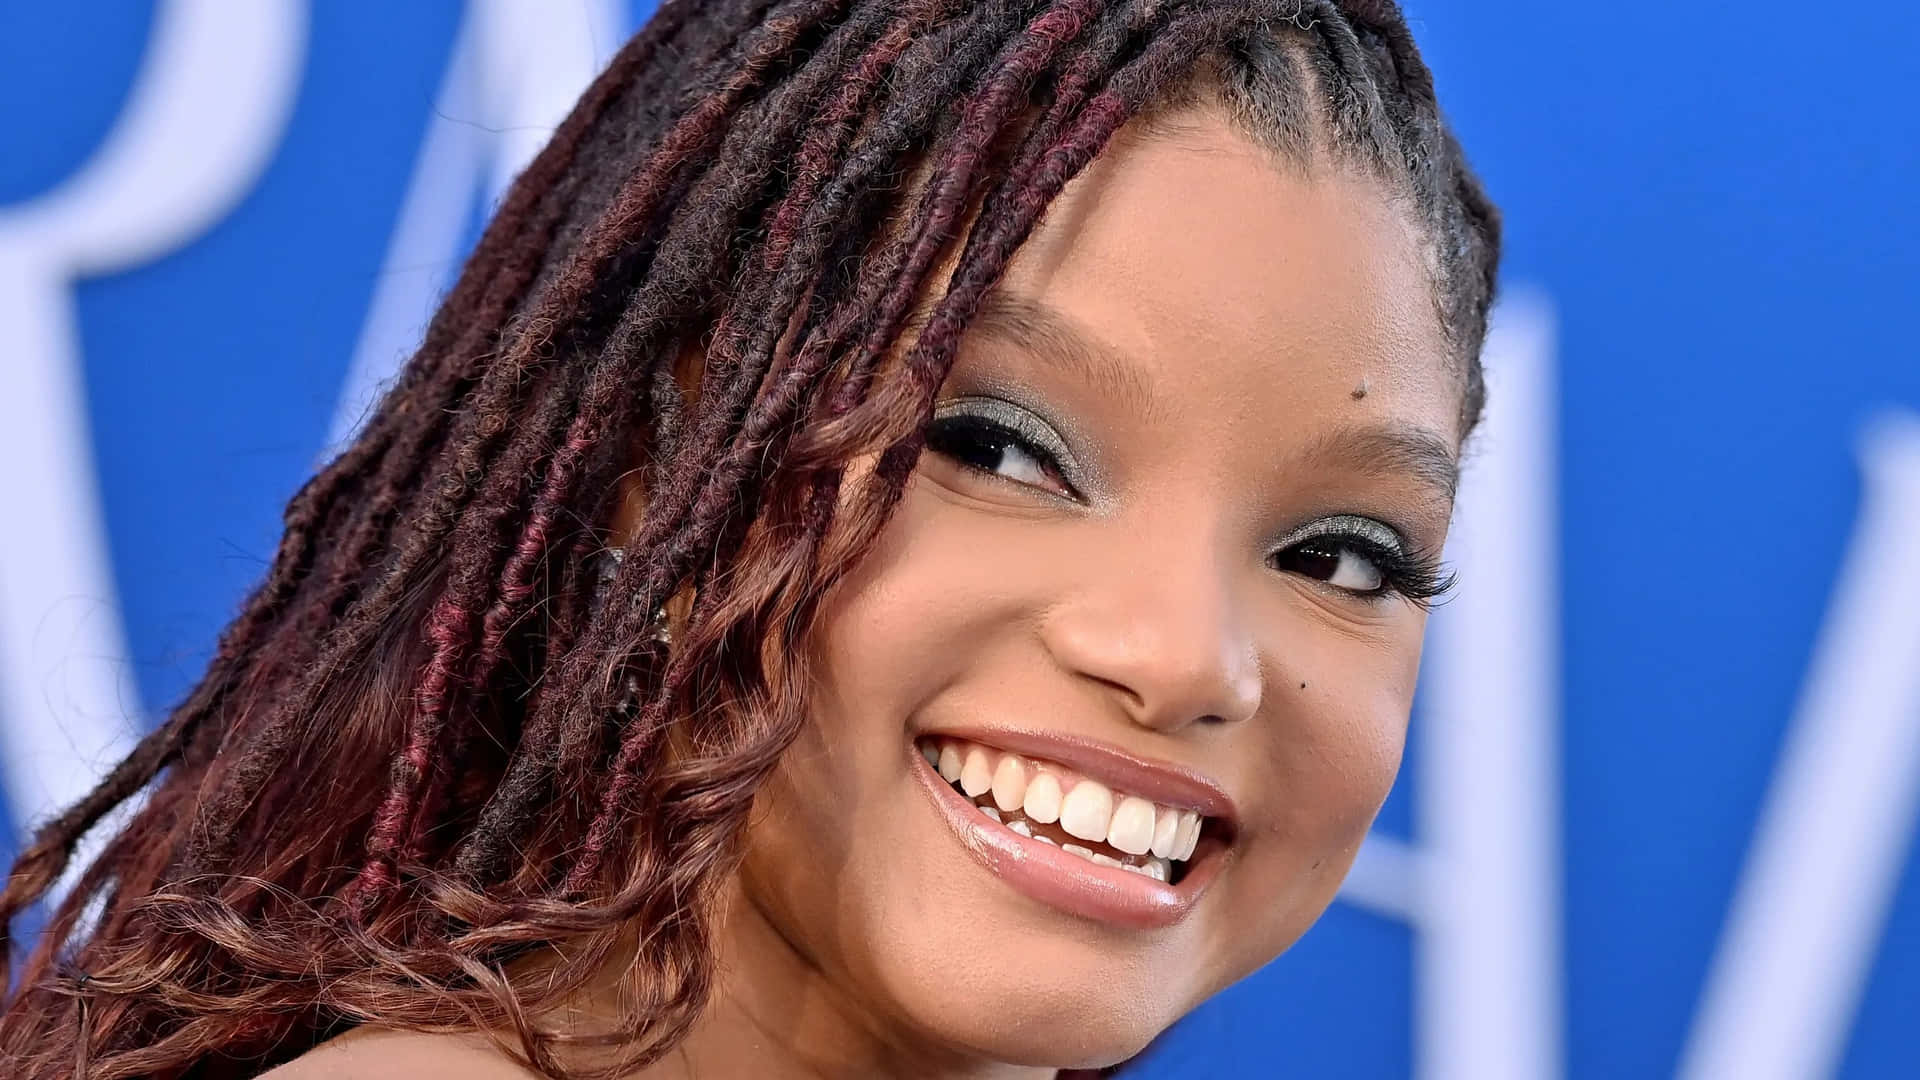 Smiling Celebritywith Braids Blue Backdrop Wallpaper